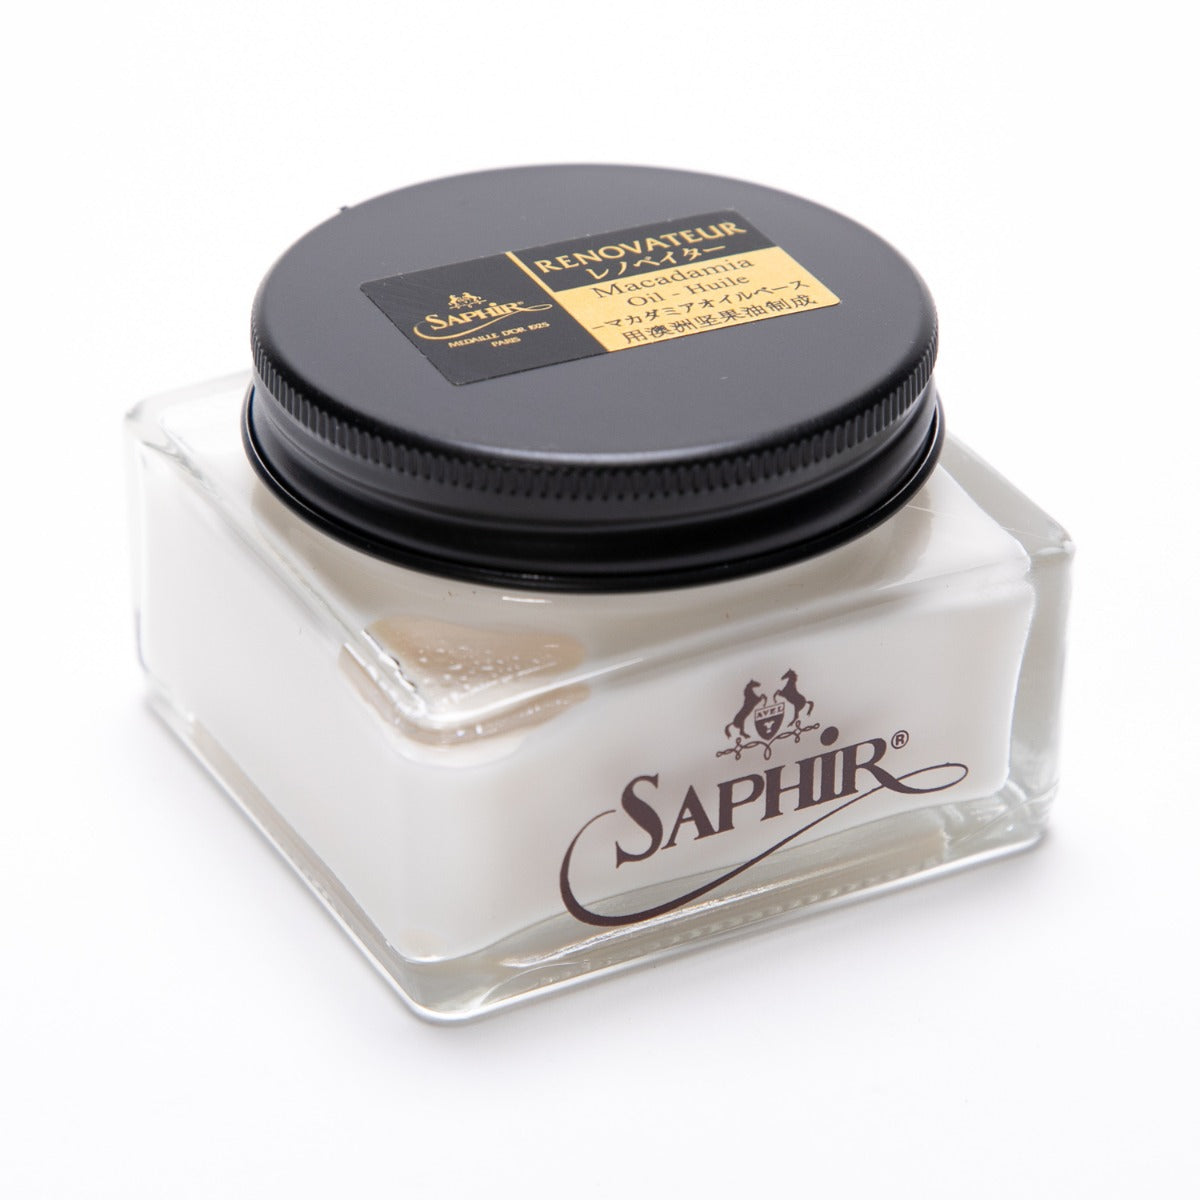 A white jar with a gold lid on a white surface, containing Saphir Renovateur w/ Macadamia Oil from KirbyAllison.com.